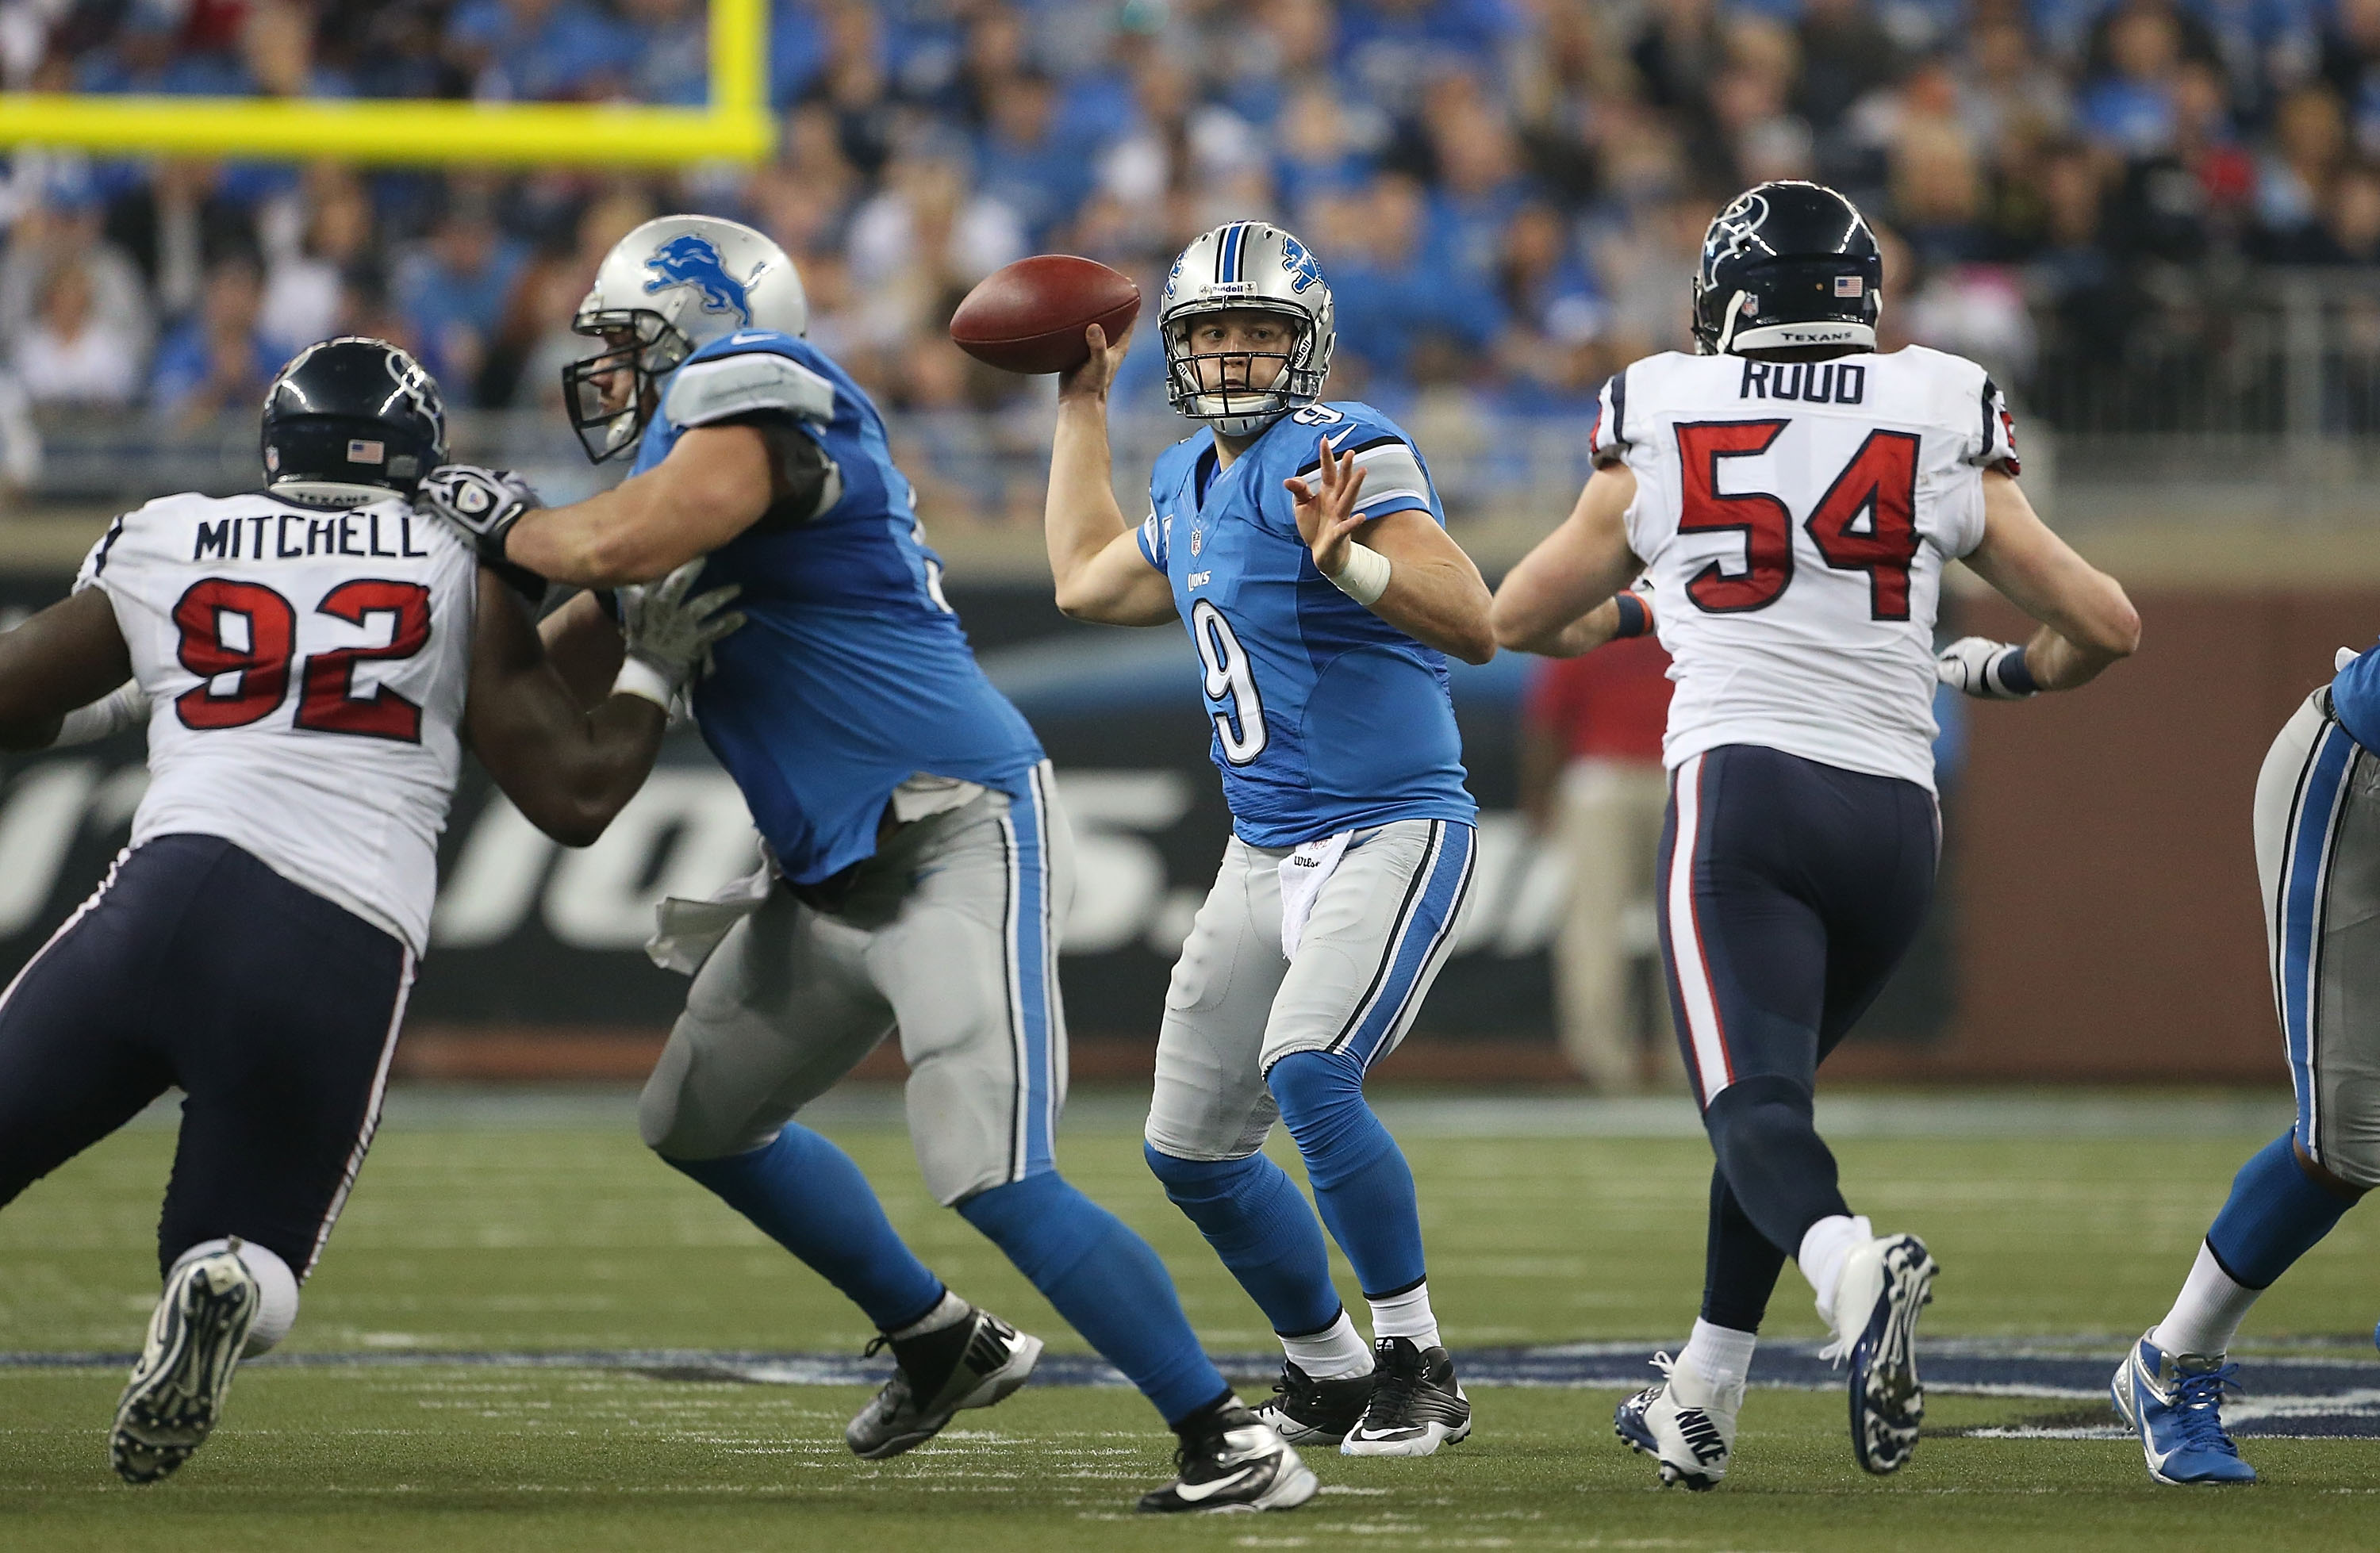 It was a wild one when the Detroit Lions and Houston Texans last met on Thanksgiving.